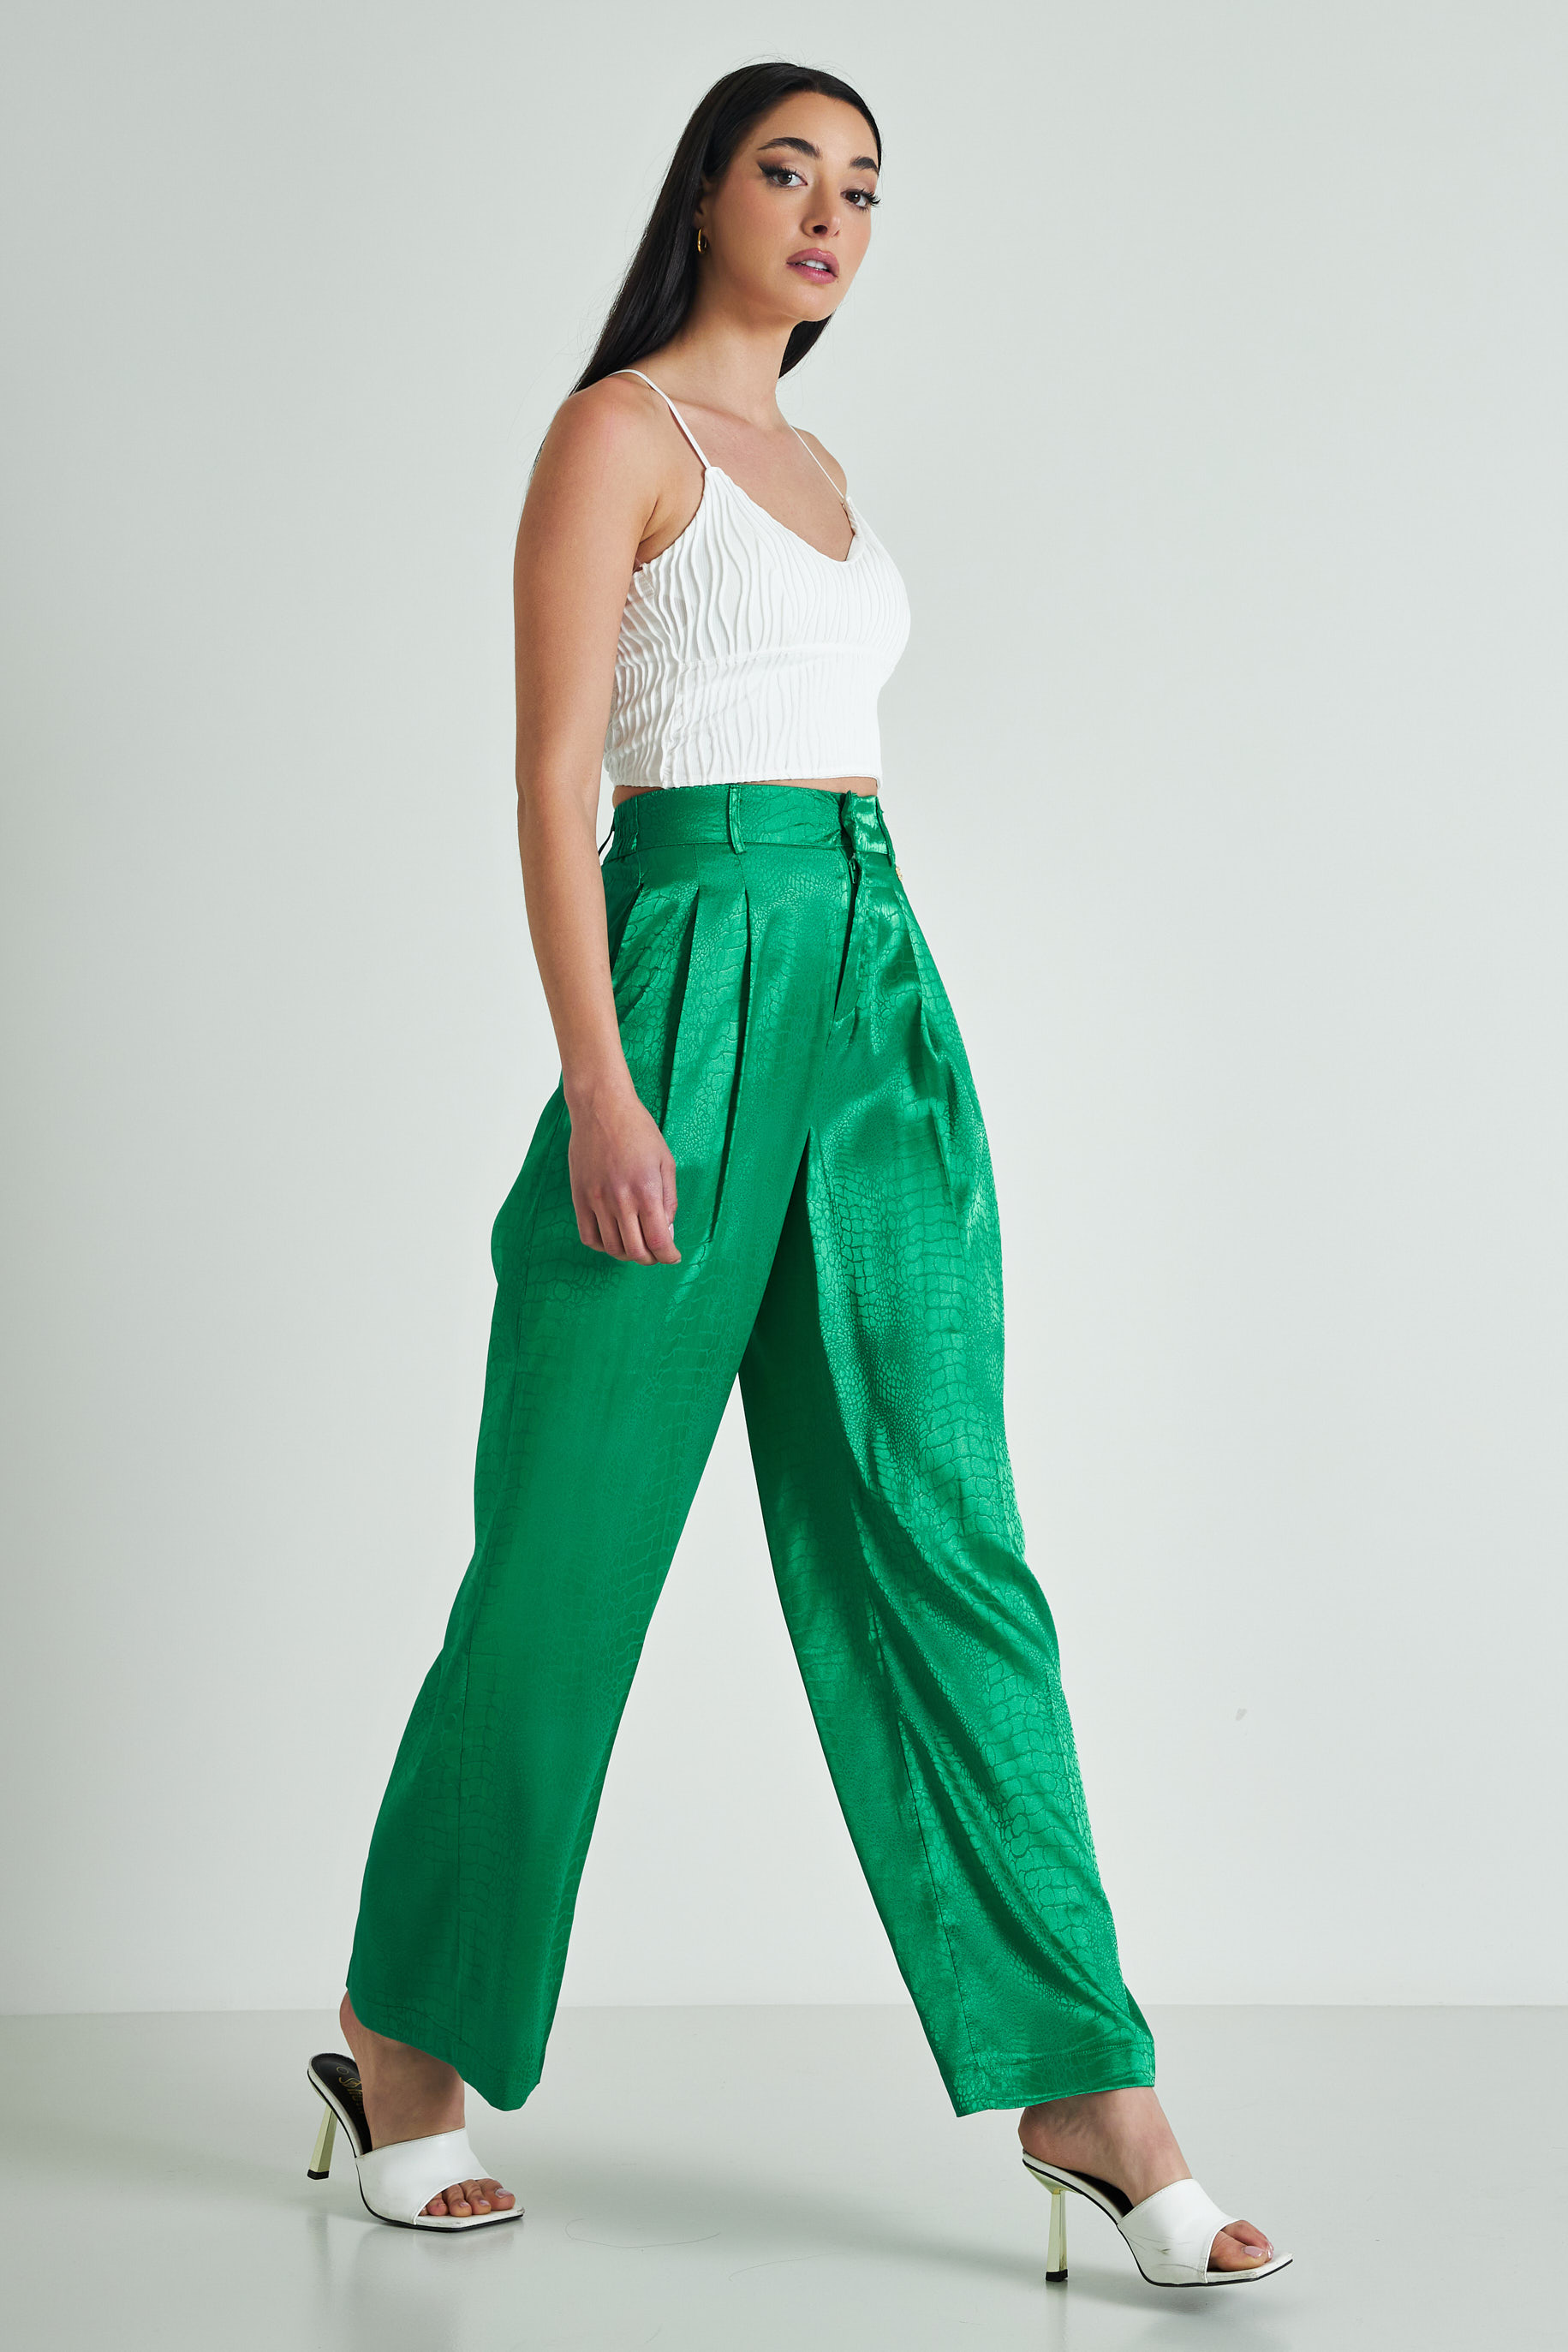 Picture of Flowing trousers